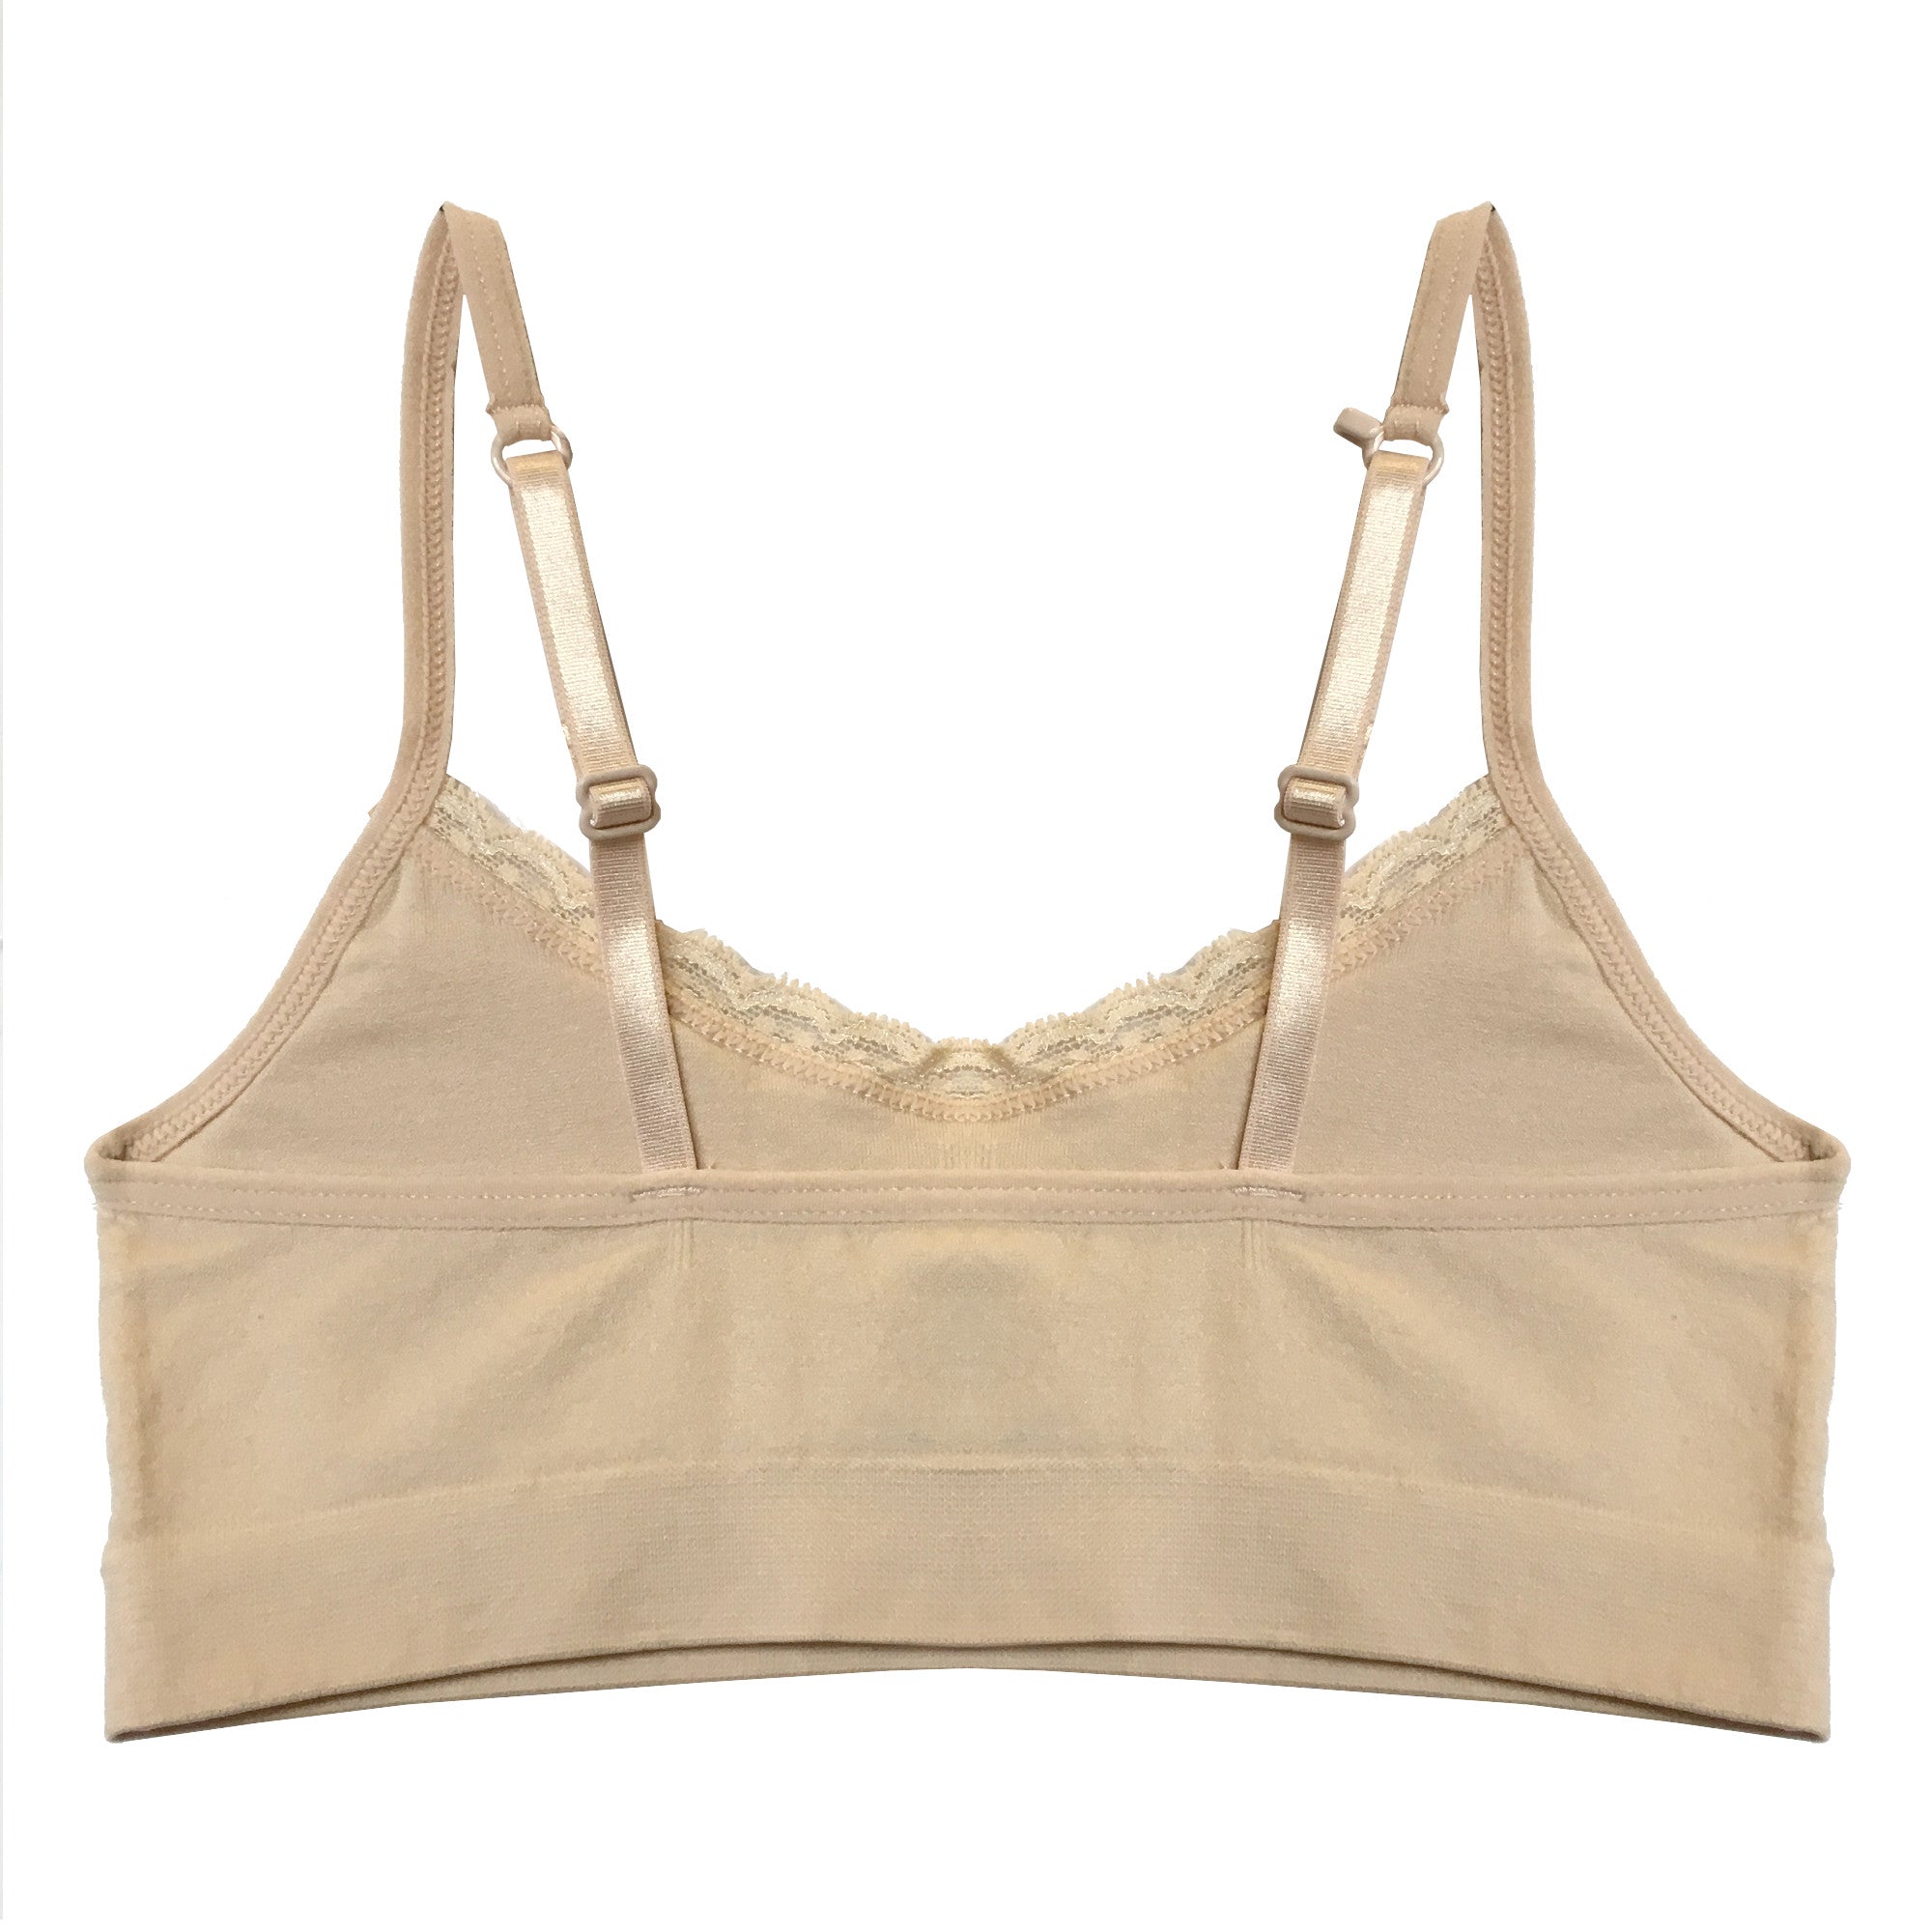 Coobie padded bralette - nude with lace, one size.